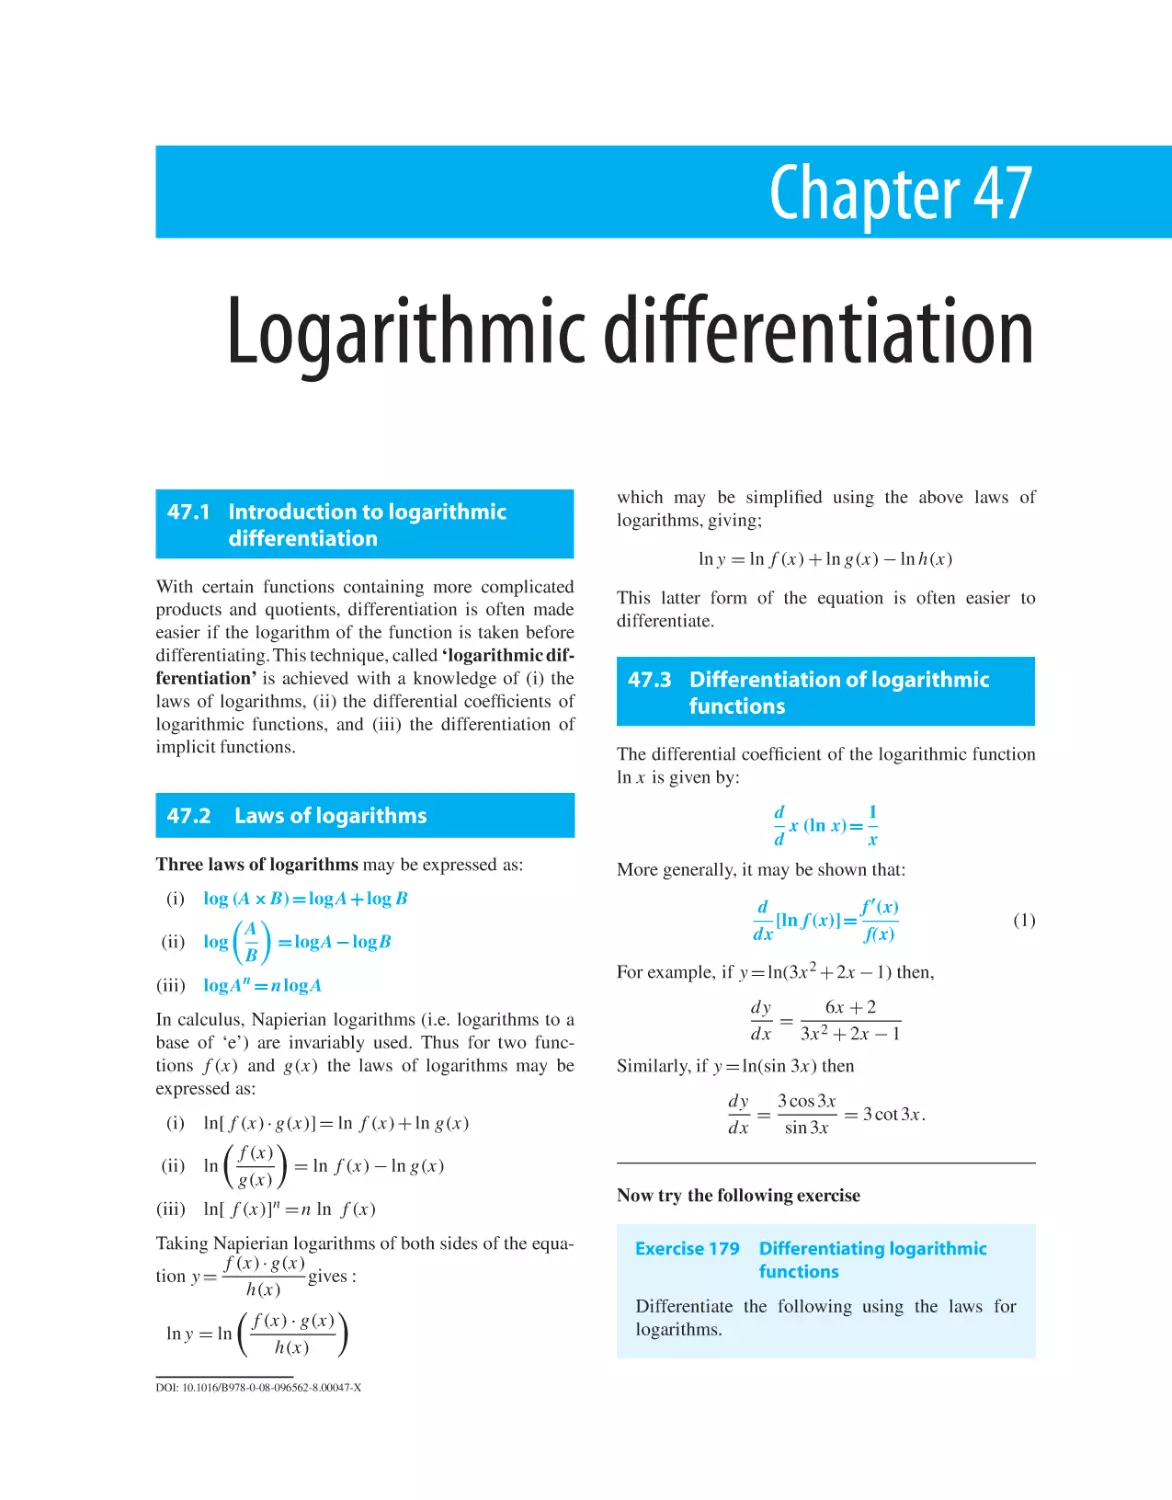 Chapter 47. Logarithmic differentiation
47.1 Introduction to logarithmic differentiation
47.2 Laws of logarithms
47.3 Differentiation of logarithmic functions